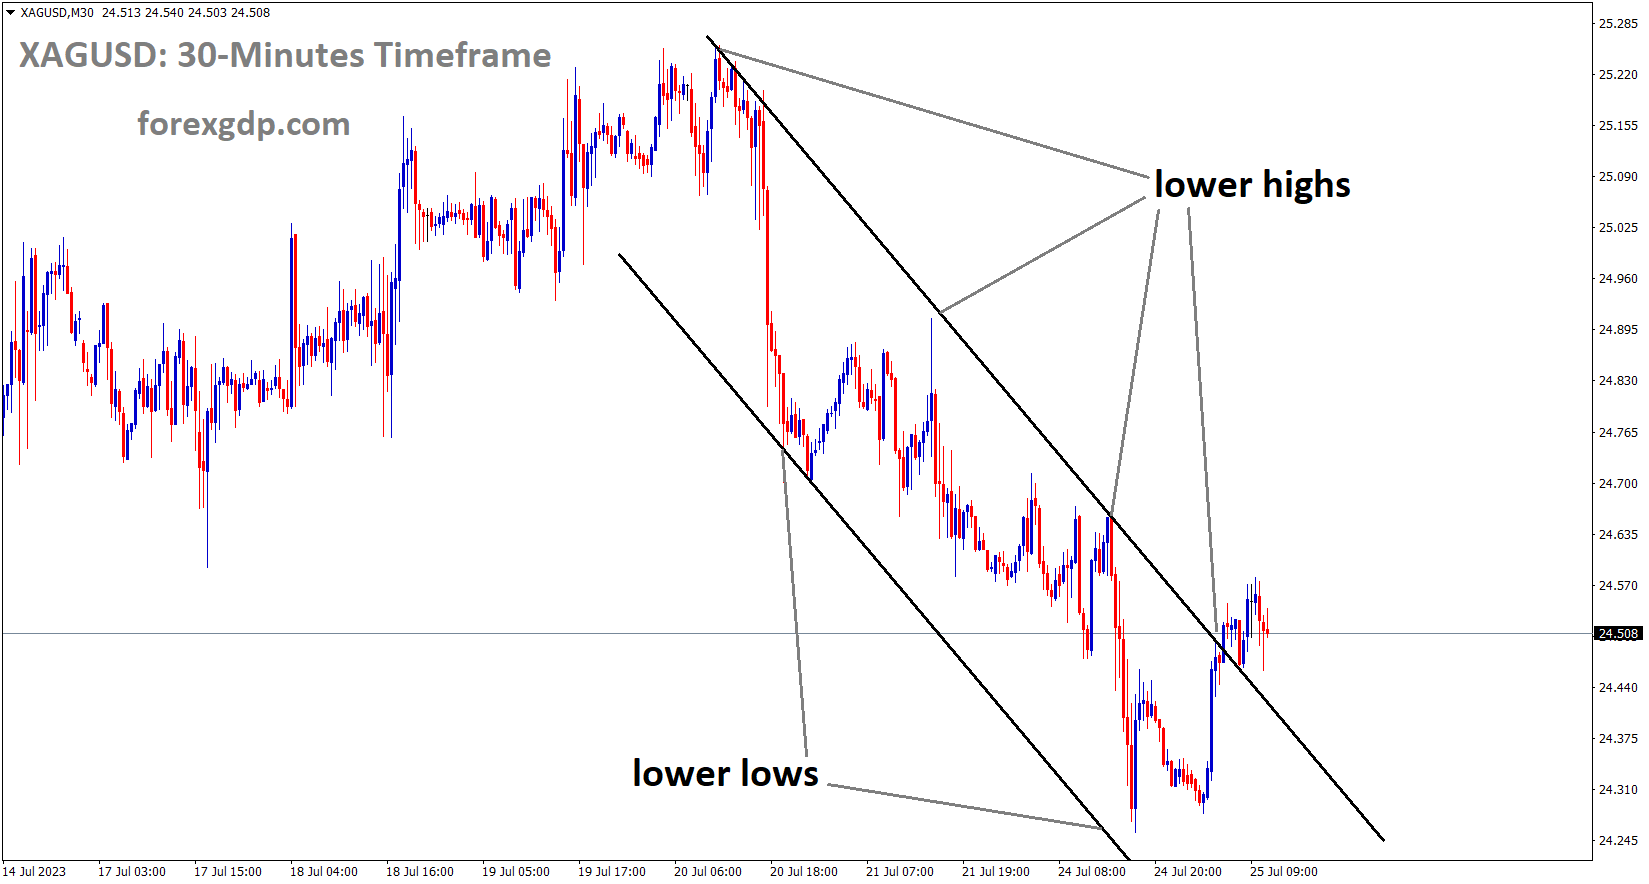 XAGUSD Silver Price is moving in the Descending channel and the market has reached the lower high area of the channel 2